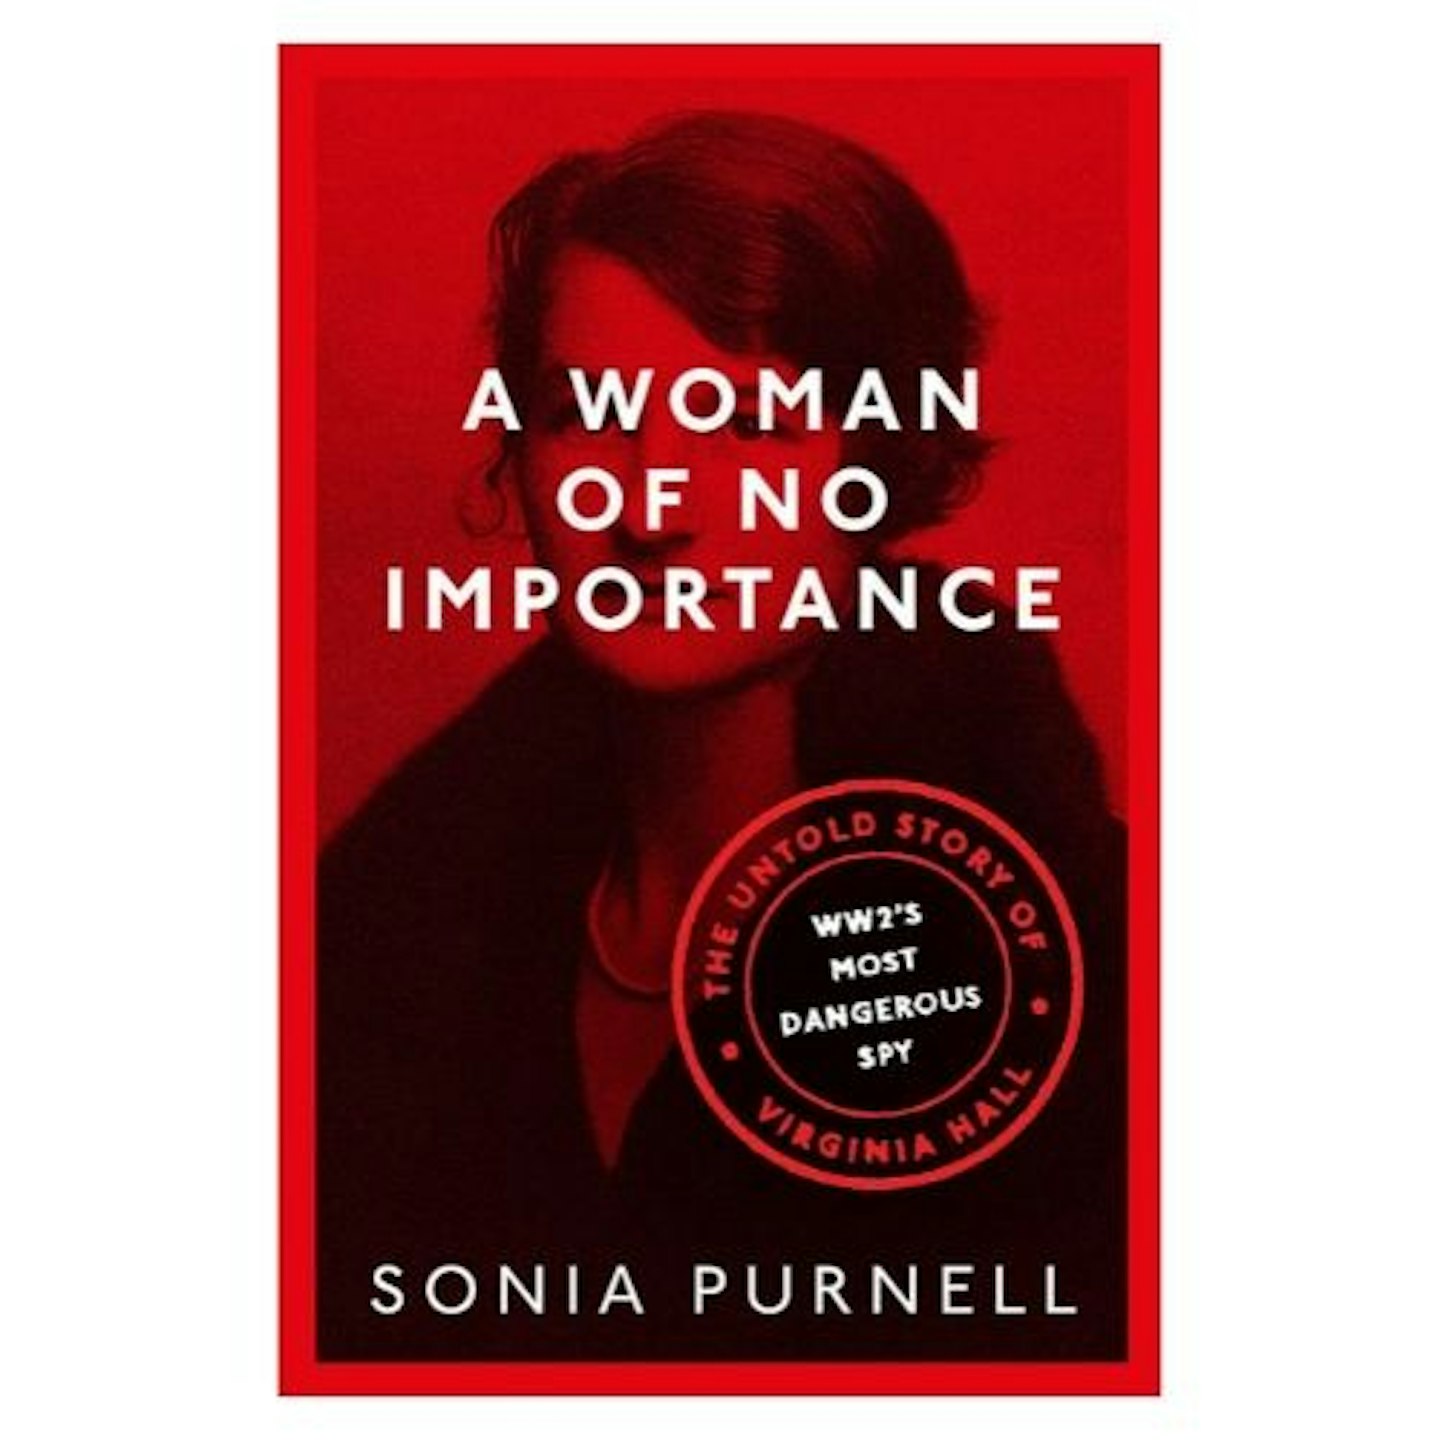 A Woman of No Importance: The Untold Story of Virginia Hall by Sonia Purnell